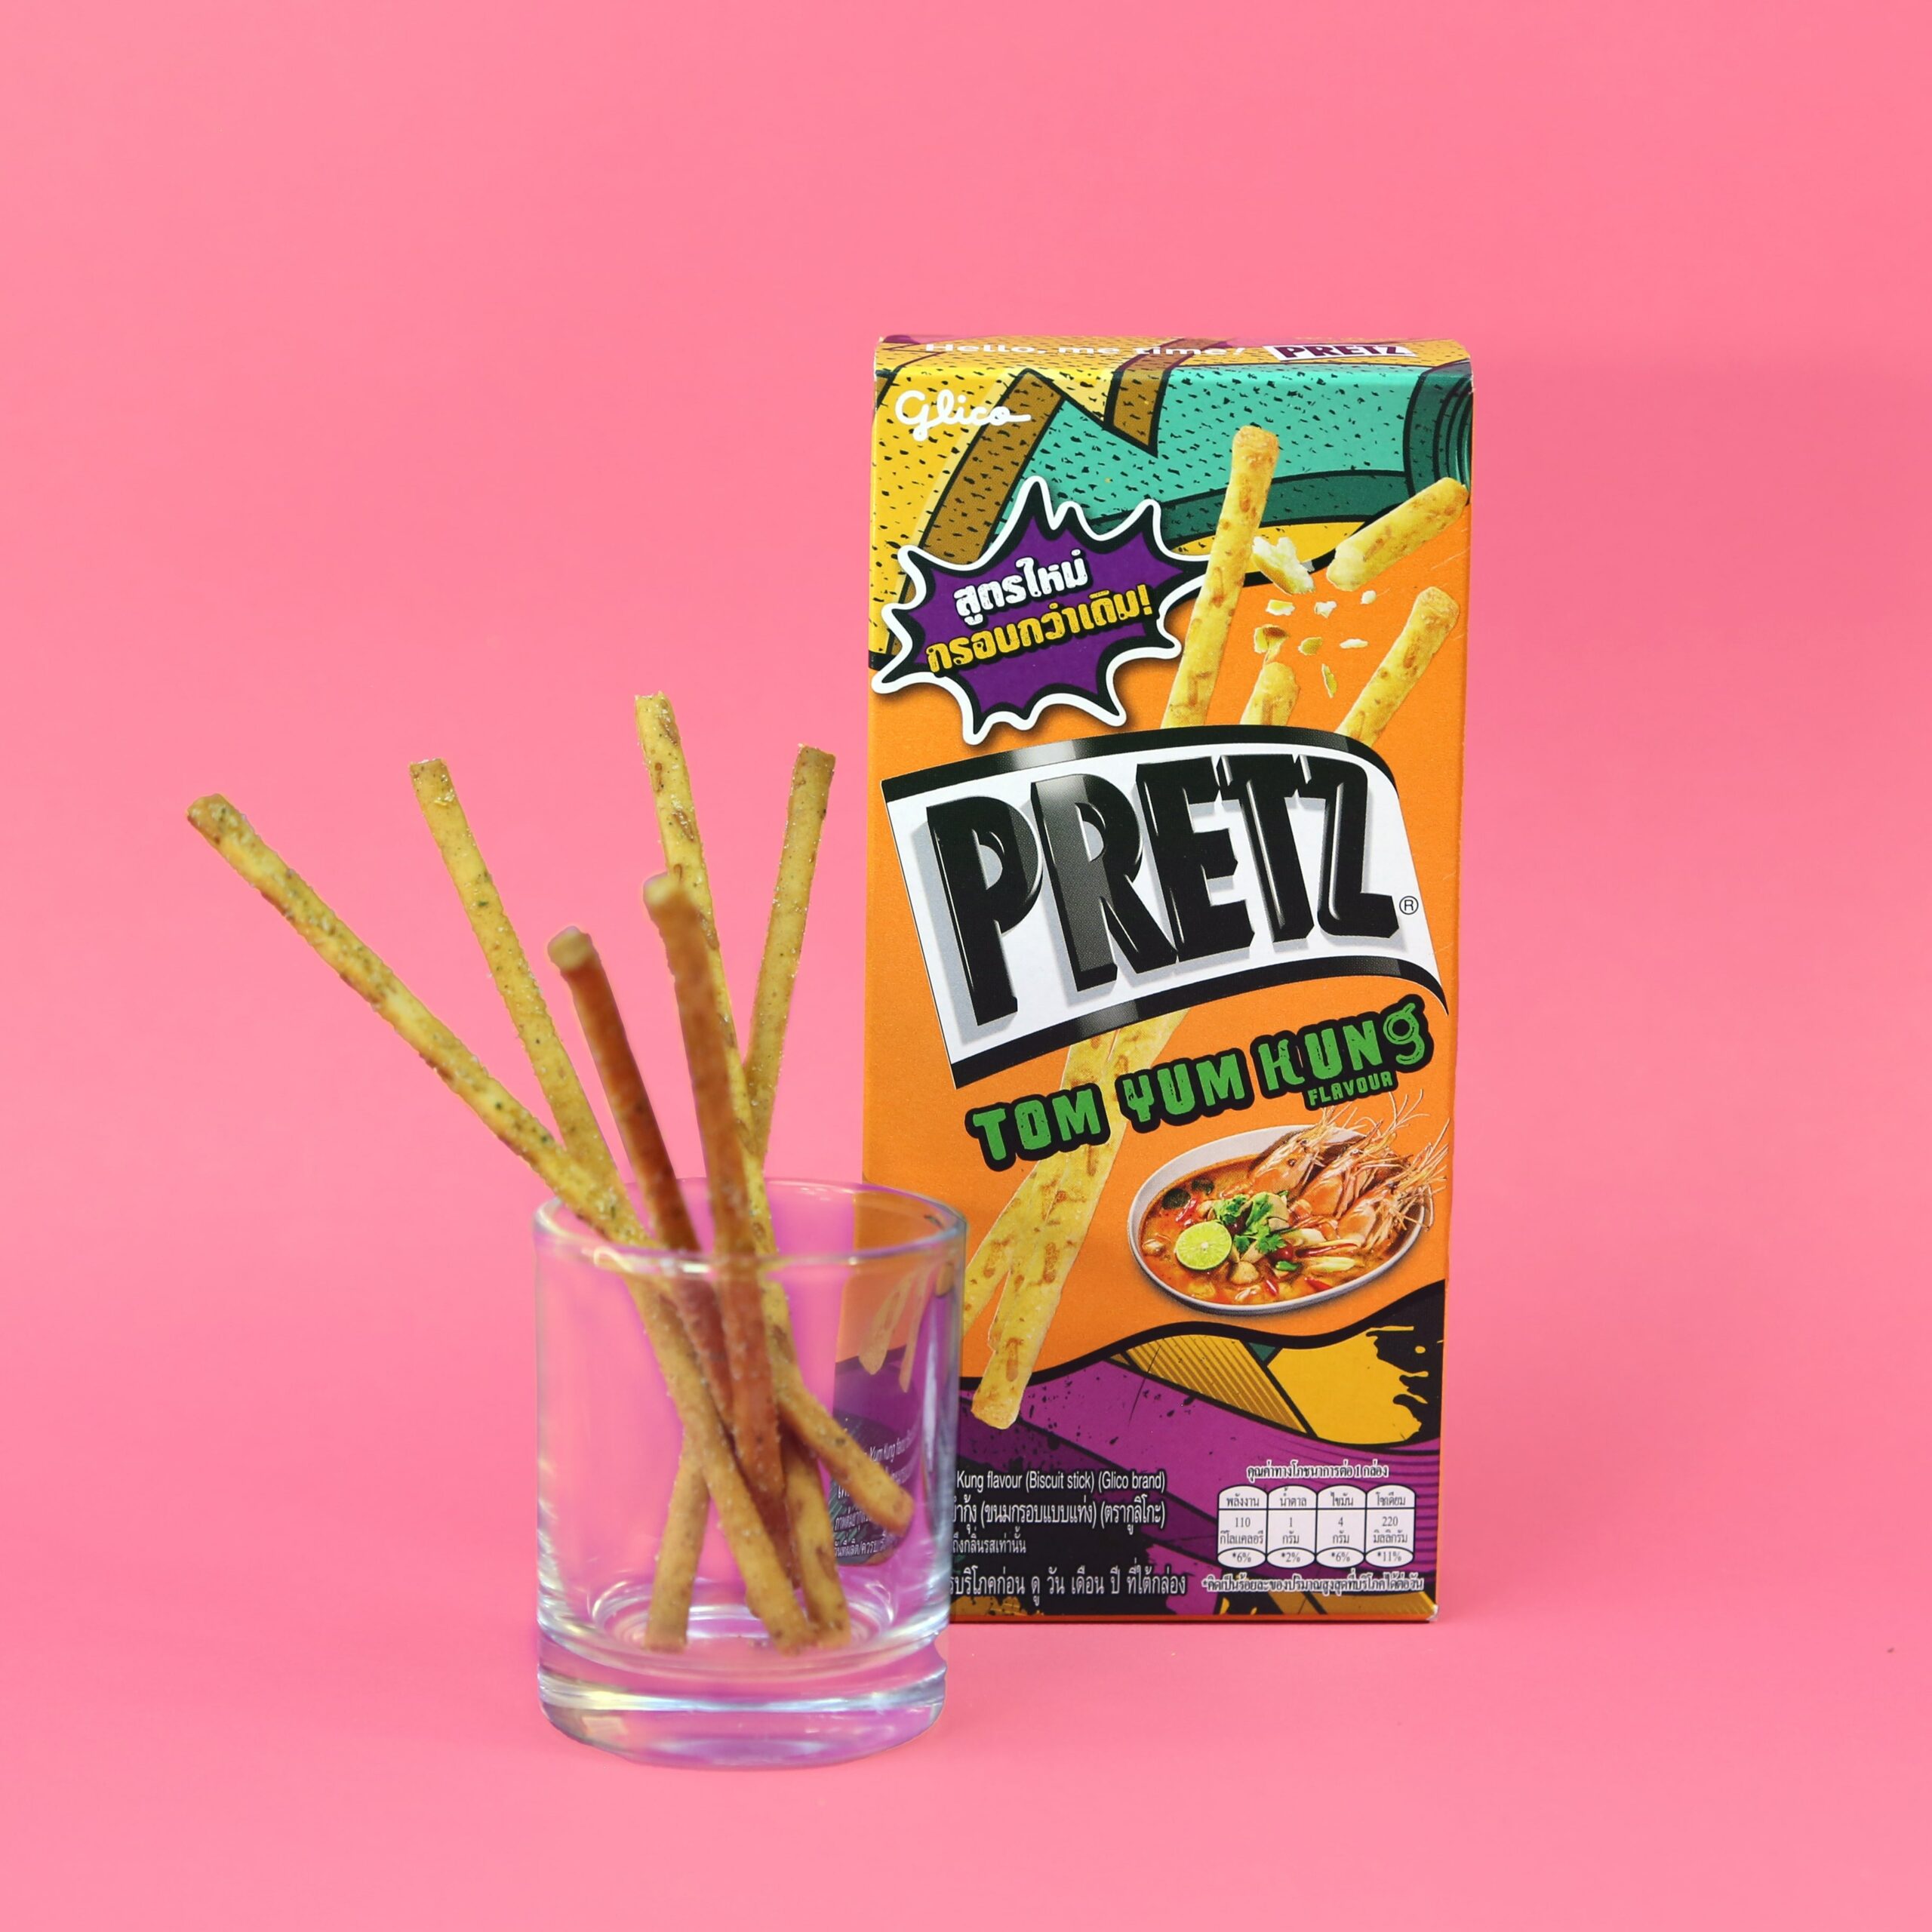 Pretz Tom Yum Kung flavored biscuit sticks included in Heap Brand authentic Thai snack subscription box. Famous Thai souvenir and spicy snack